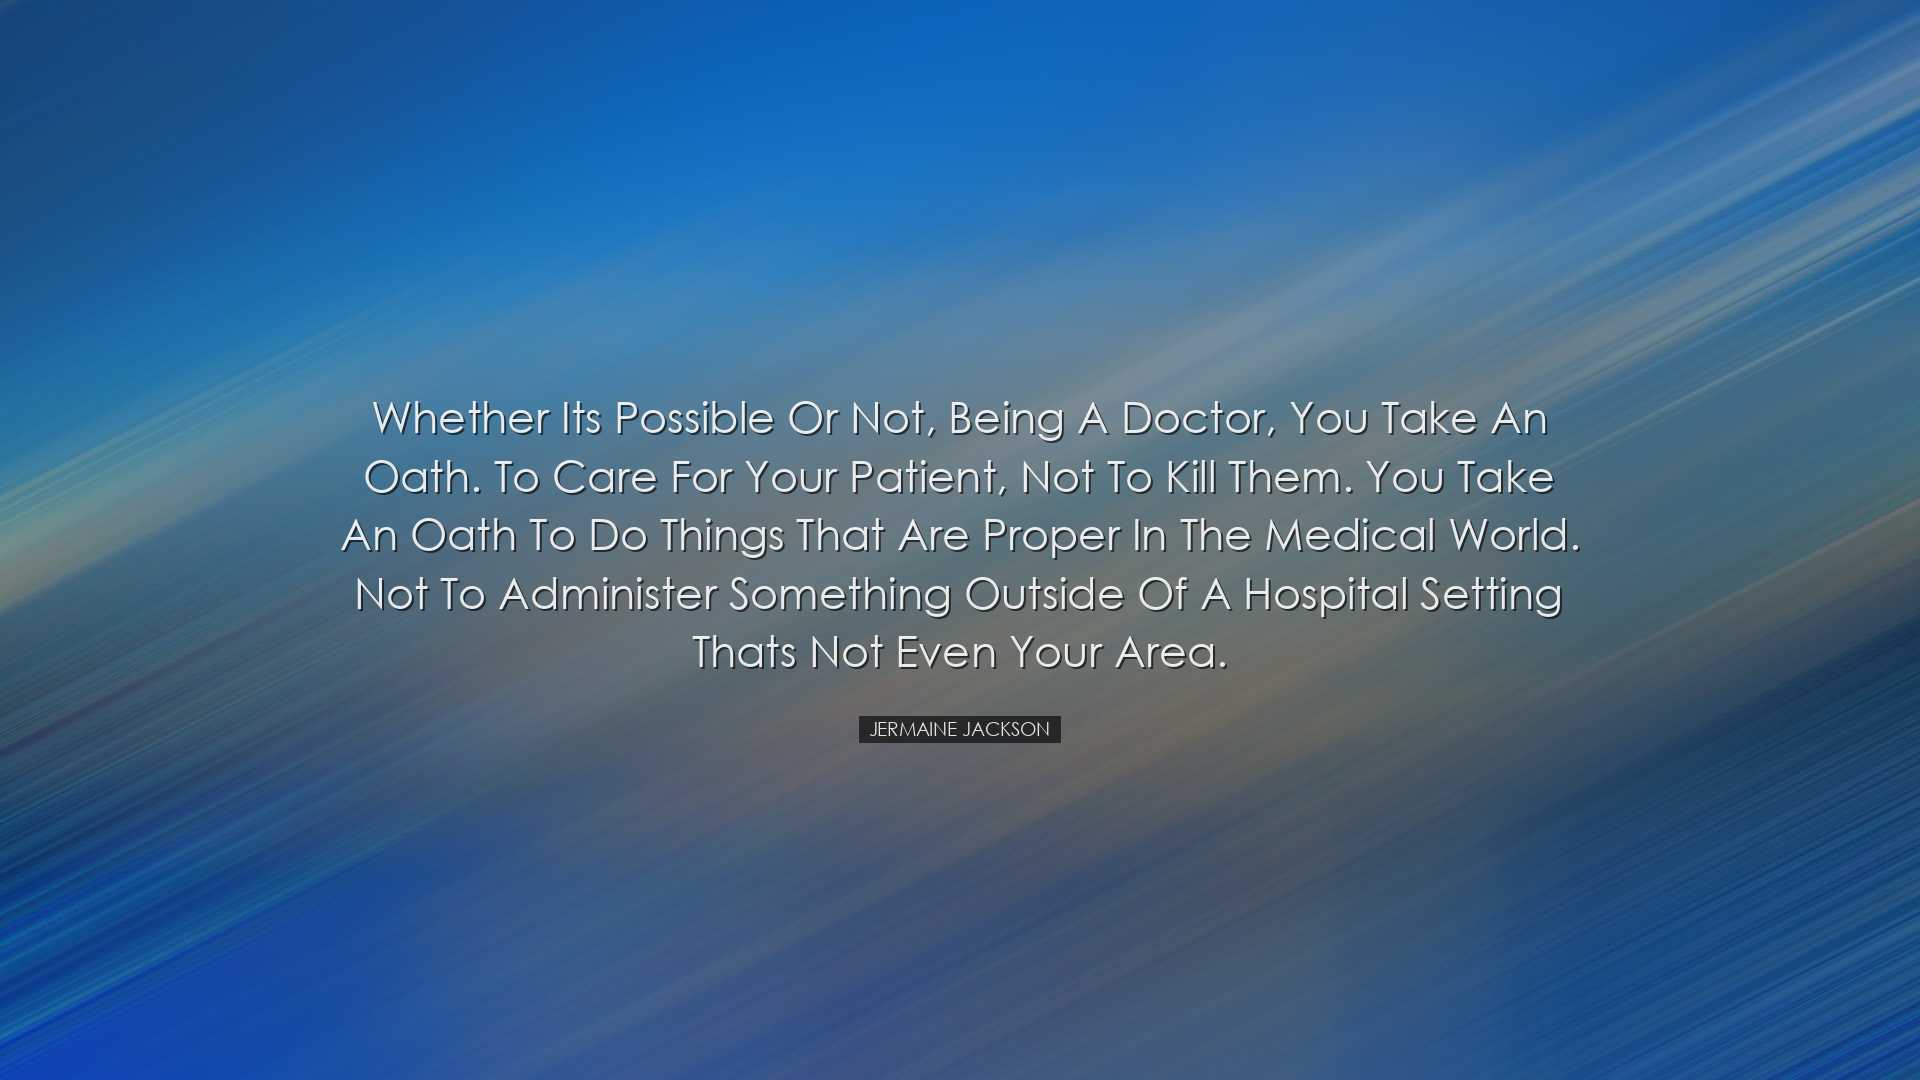 Whether its possible or not, being a doctor, you take an oath. To